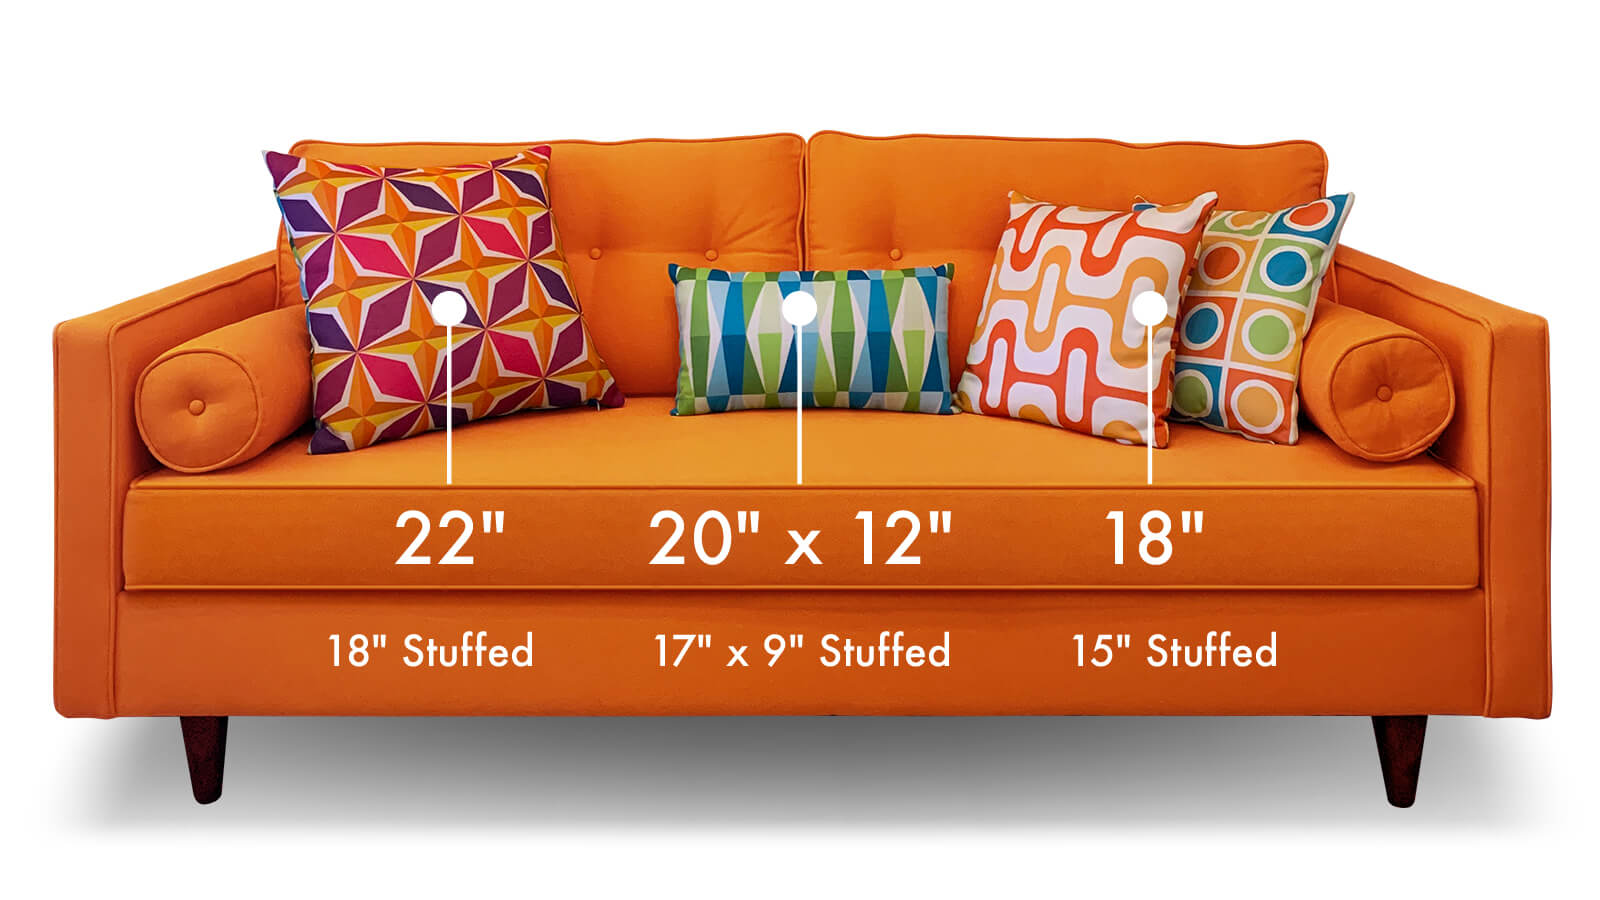 Mid-century modern throw pillows measurements selector on a couch